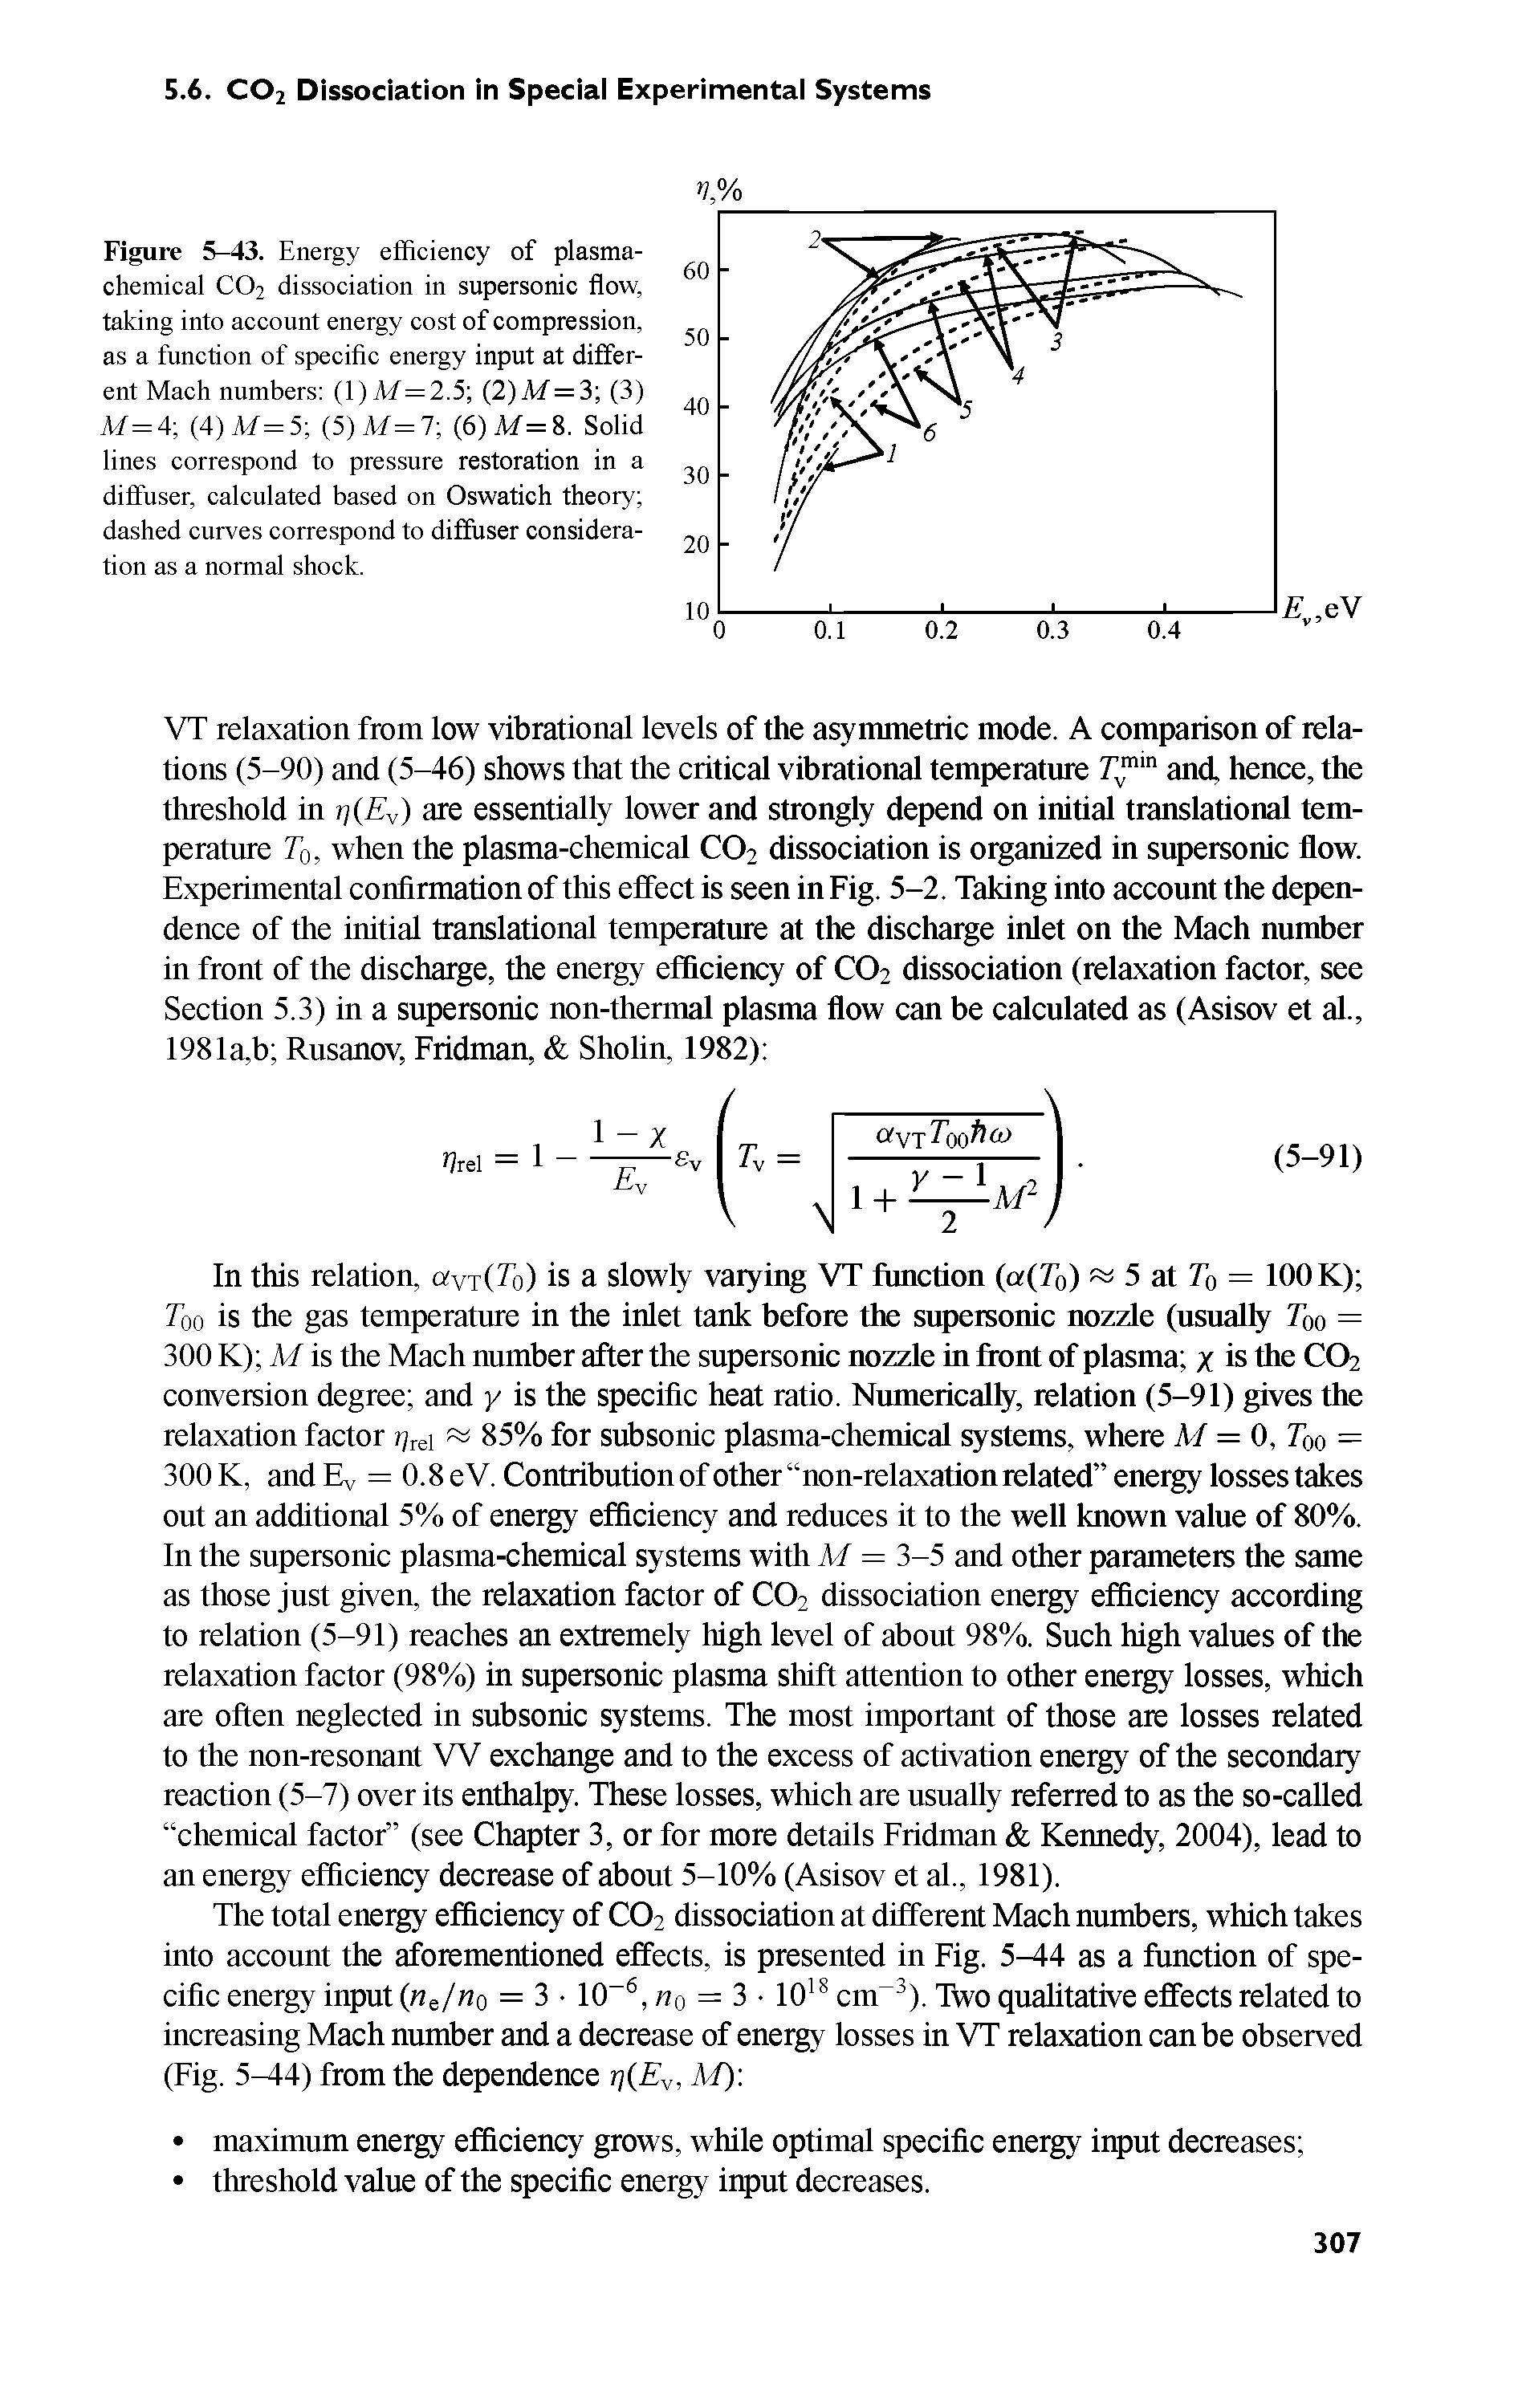 Figure 5-43. Energy efficiency of plasma-chemical CO2 dissociation in supersonic flow, taking into account energy cost of compression, as a function of specific energy input at different Mach numbers (1)M=2.5 (2)M = 3 (3) M=4 (4)M=5 (5)M=7 (6)M=8. Solid lines correspond to pressure restoration in a ditfuser, calculated based on Oswatieh theory dashed curves correspond to diffuser eonsidera-tion as a normal shock.